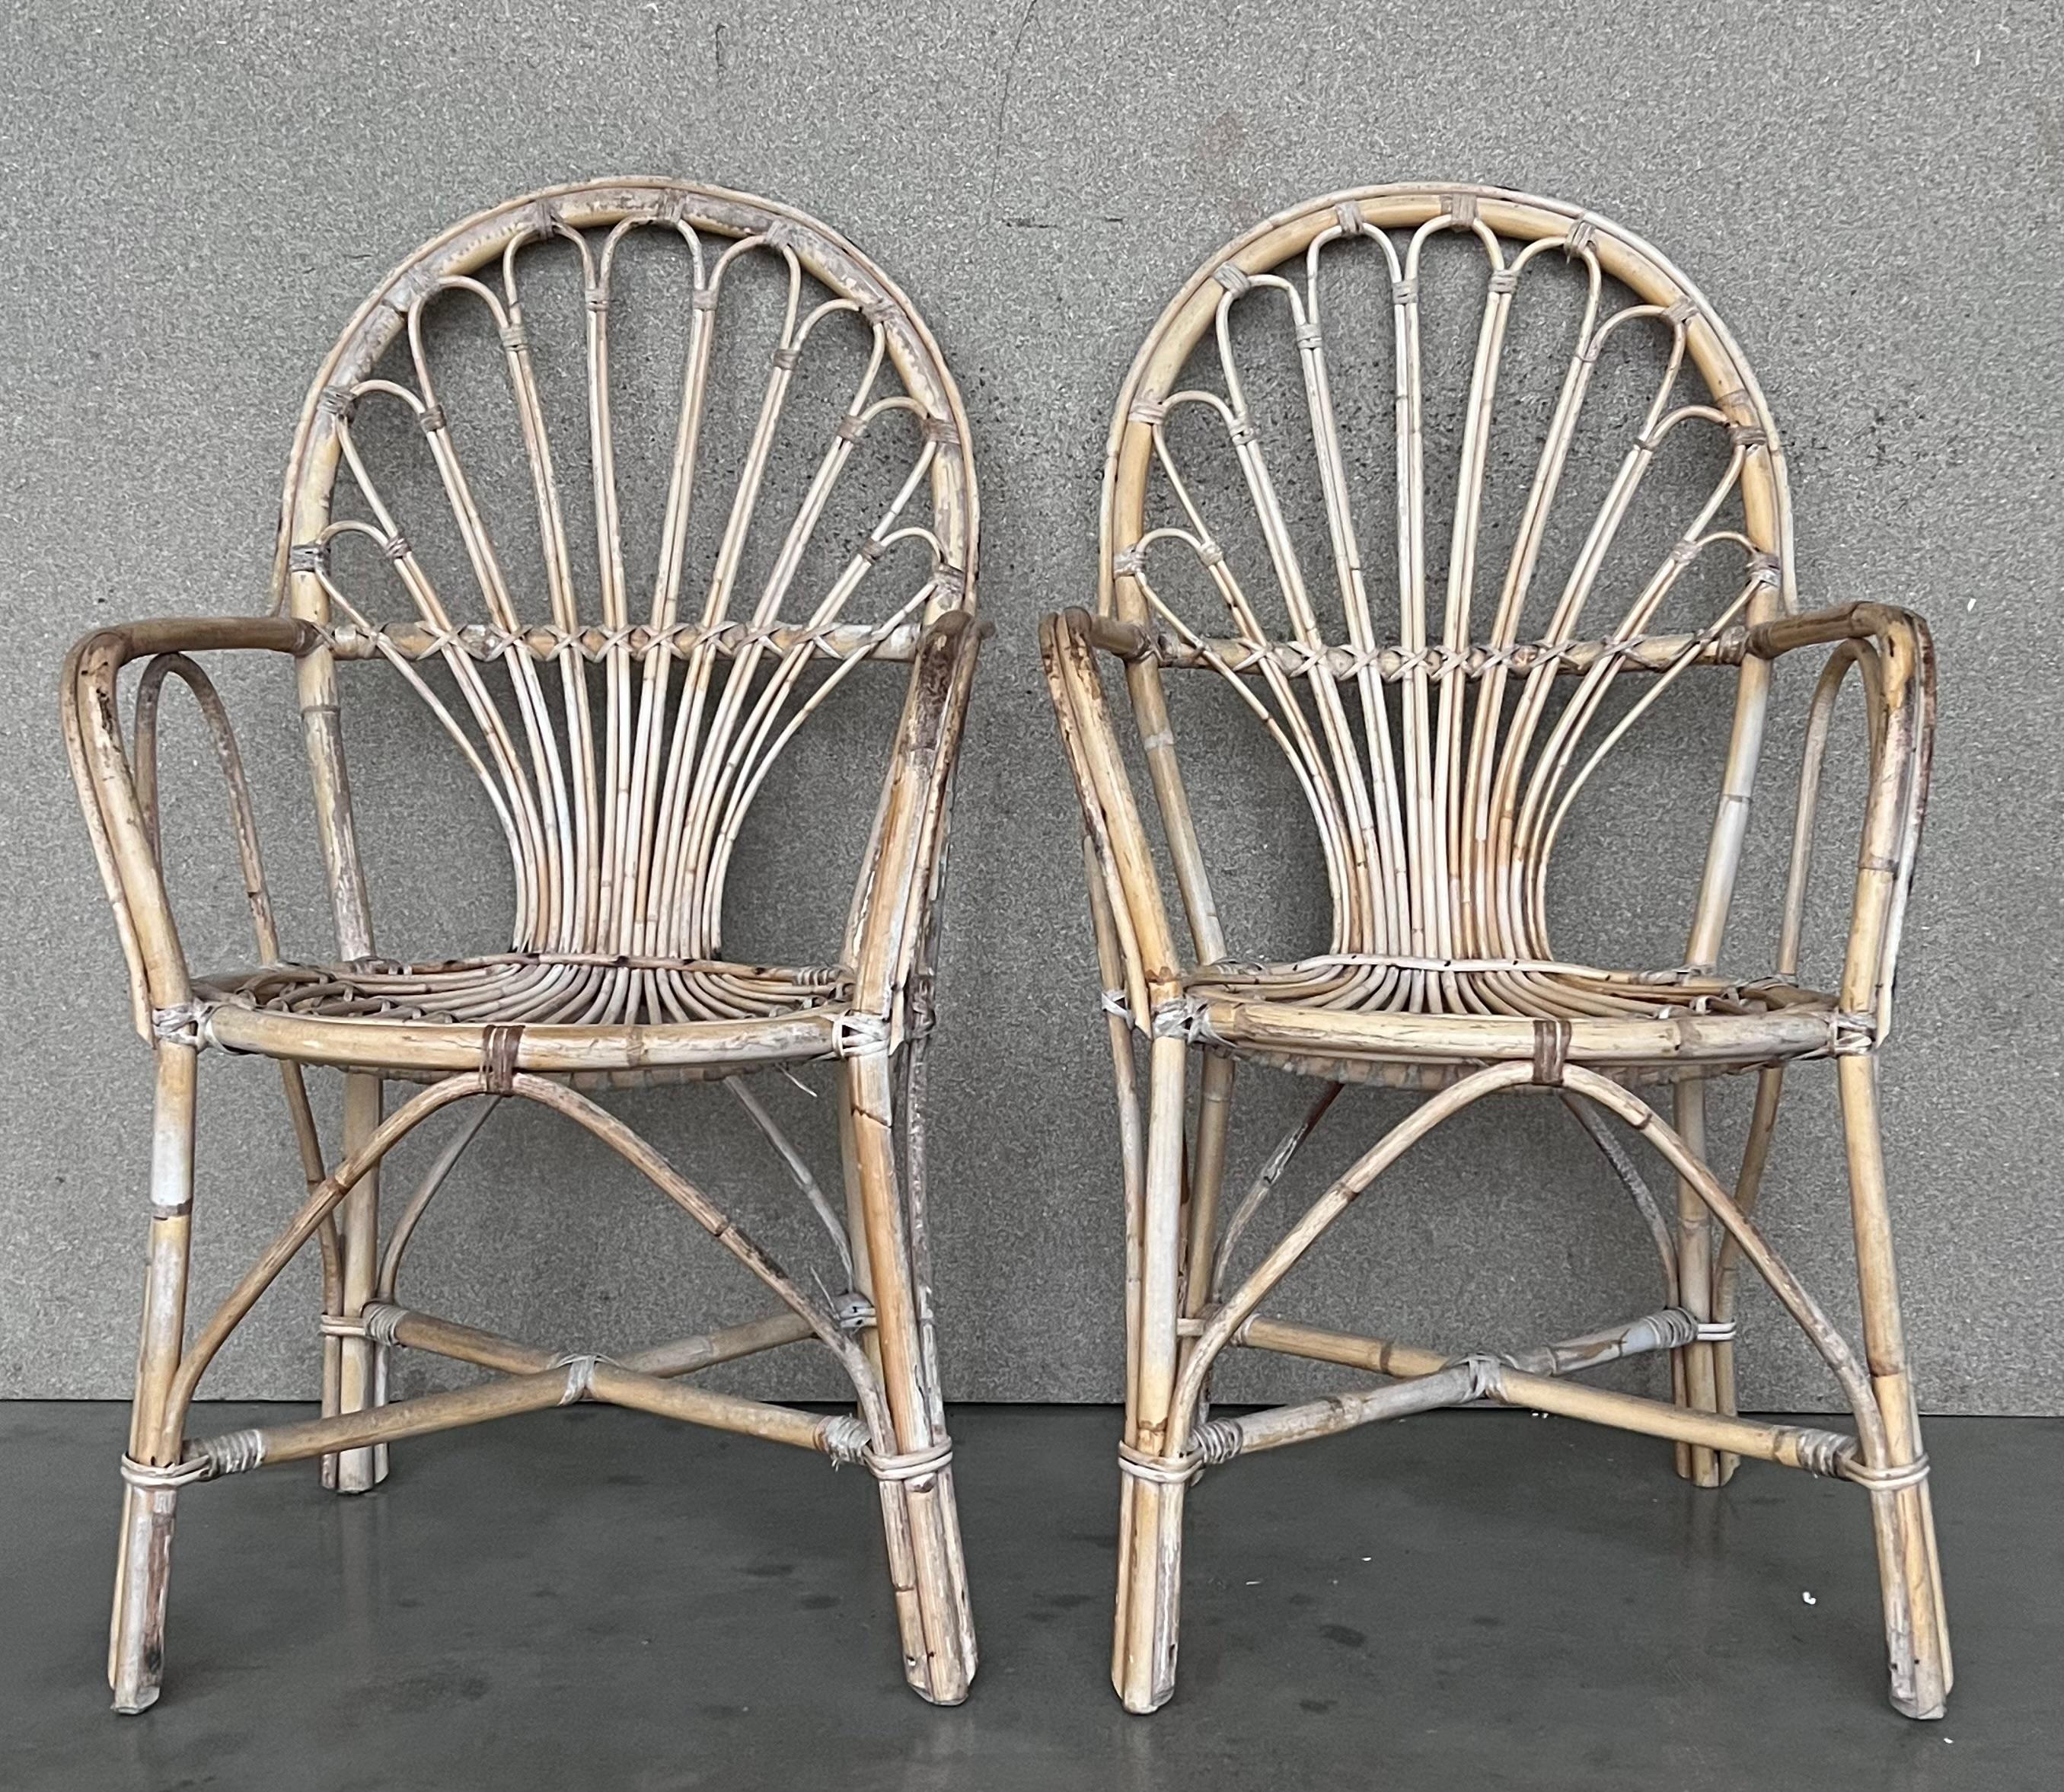 1960s pair of Spanish bamboo armchairs with Ovaled back rest
Restored.